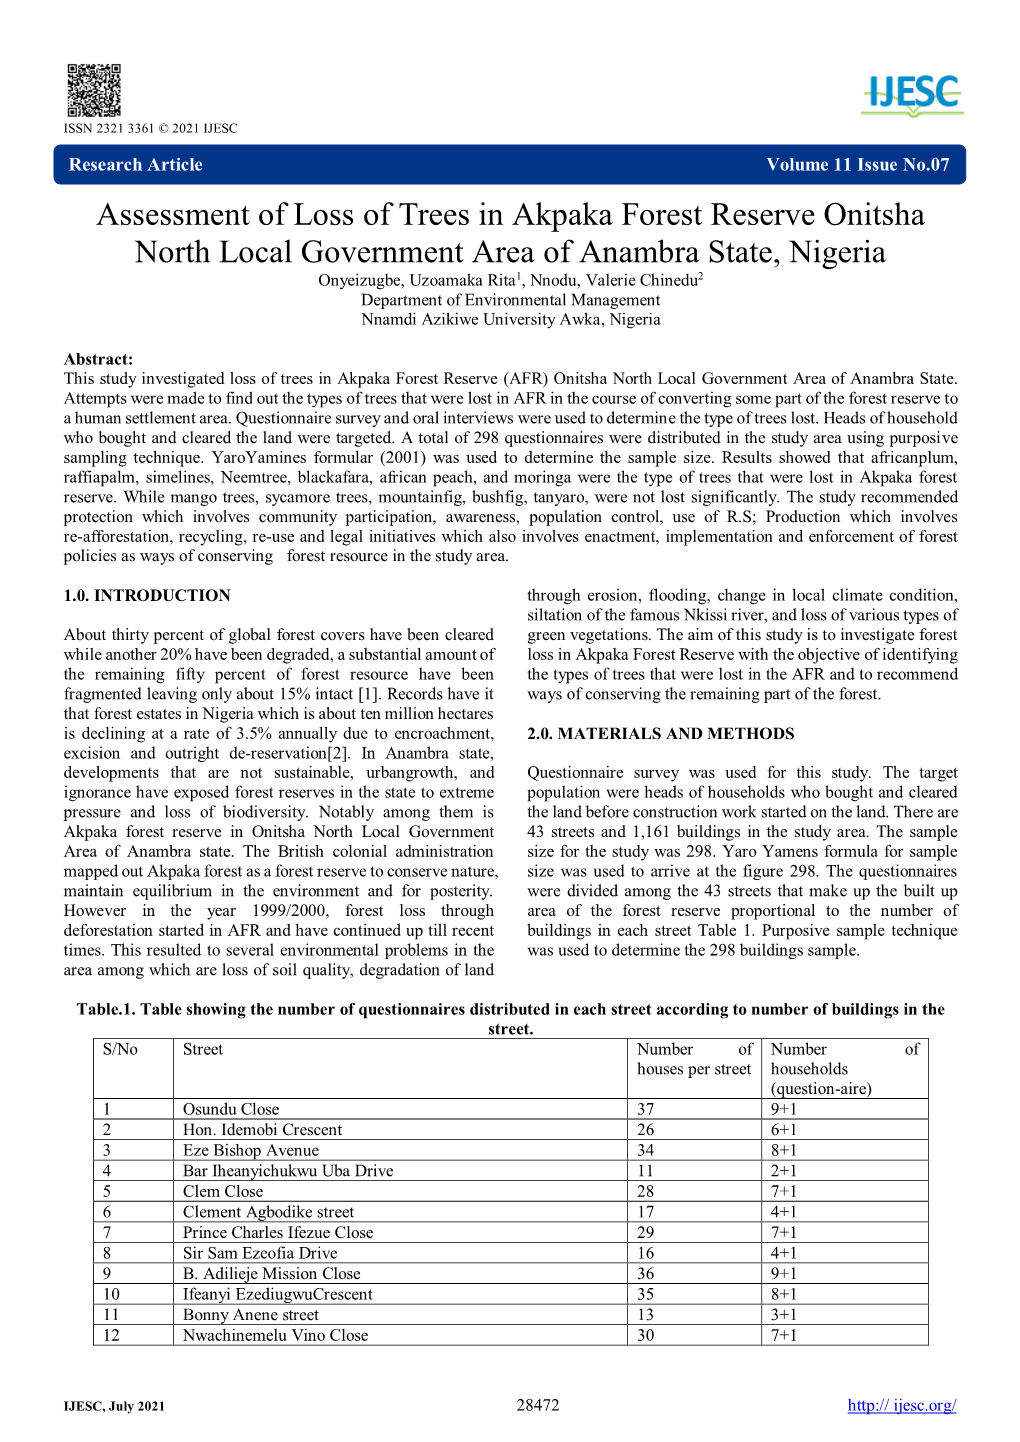 Assessment of Loss of Trees in Akpaka Forest Reserve Onitsha North Local Government Area of Anambra State, Nigeria